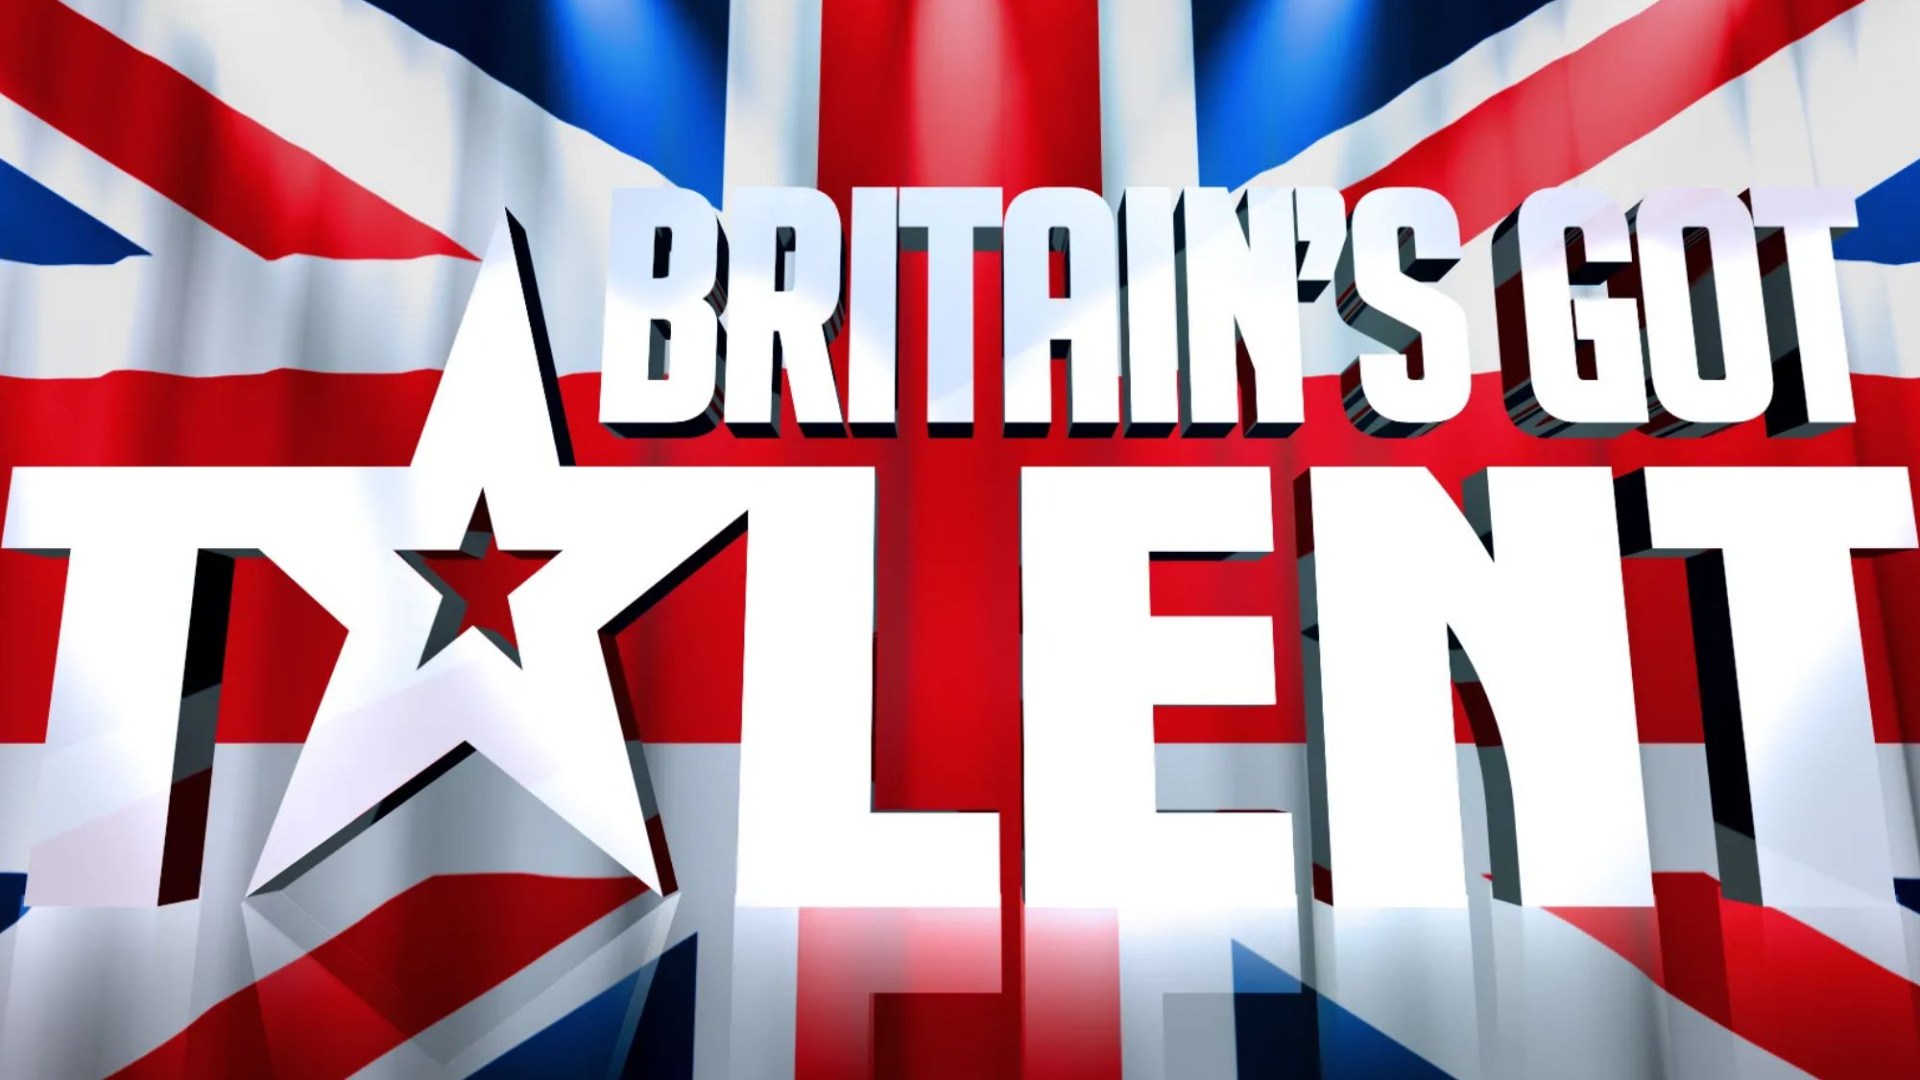 BGT winners revealed ahead of live shows after act wows fans and overtakes singing rival [Video]